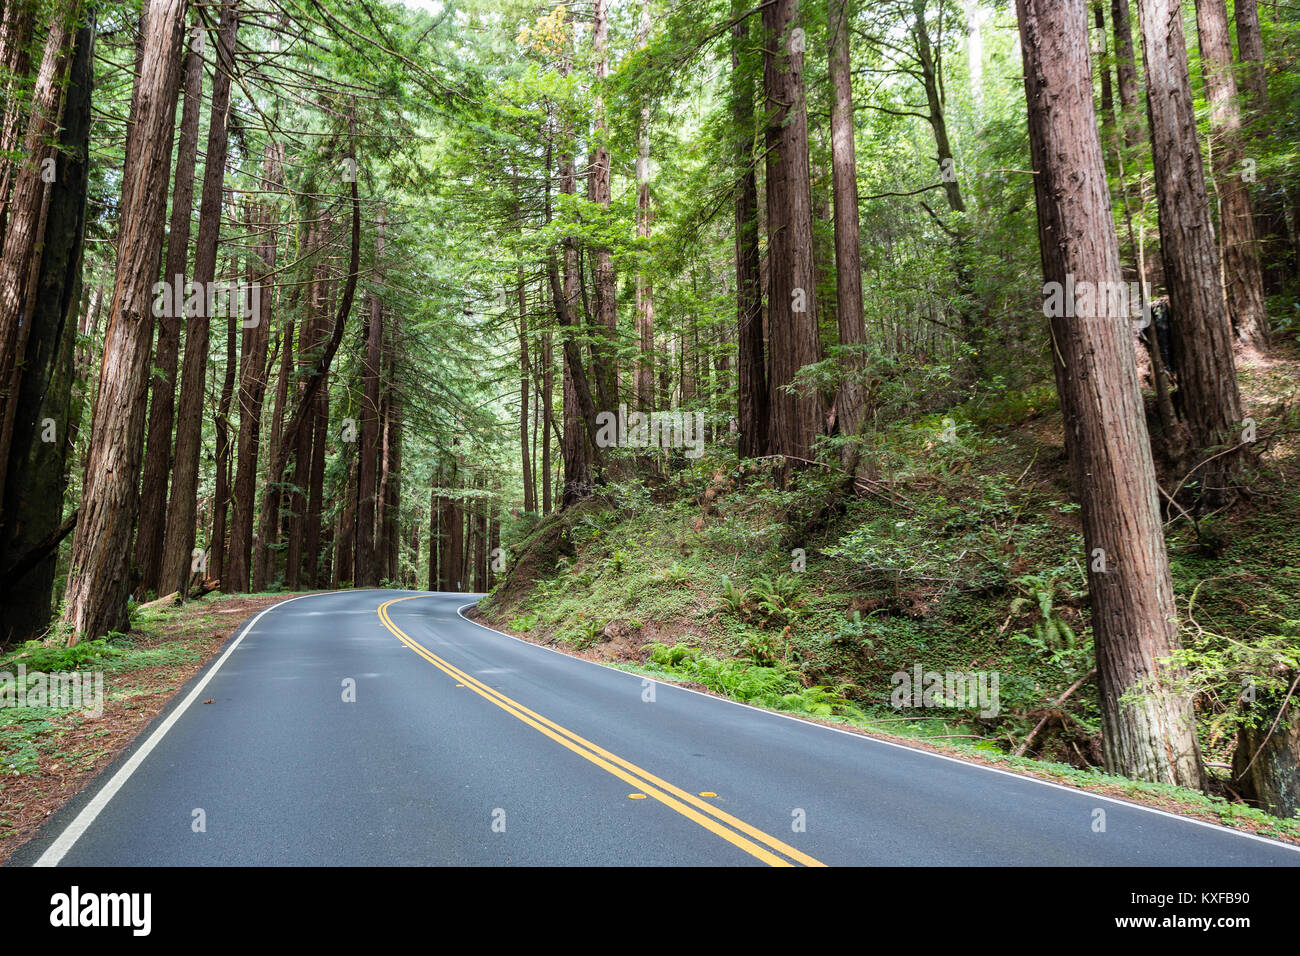 State Route 128 winds through tall trees, including Redwood trees, in Mendocino County, California. Stock Photo